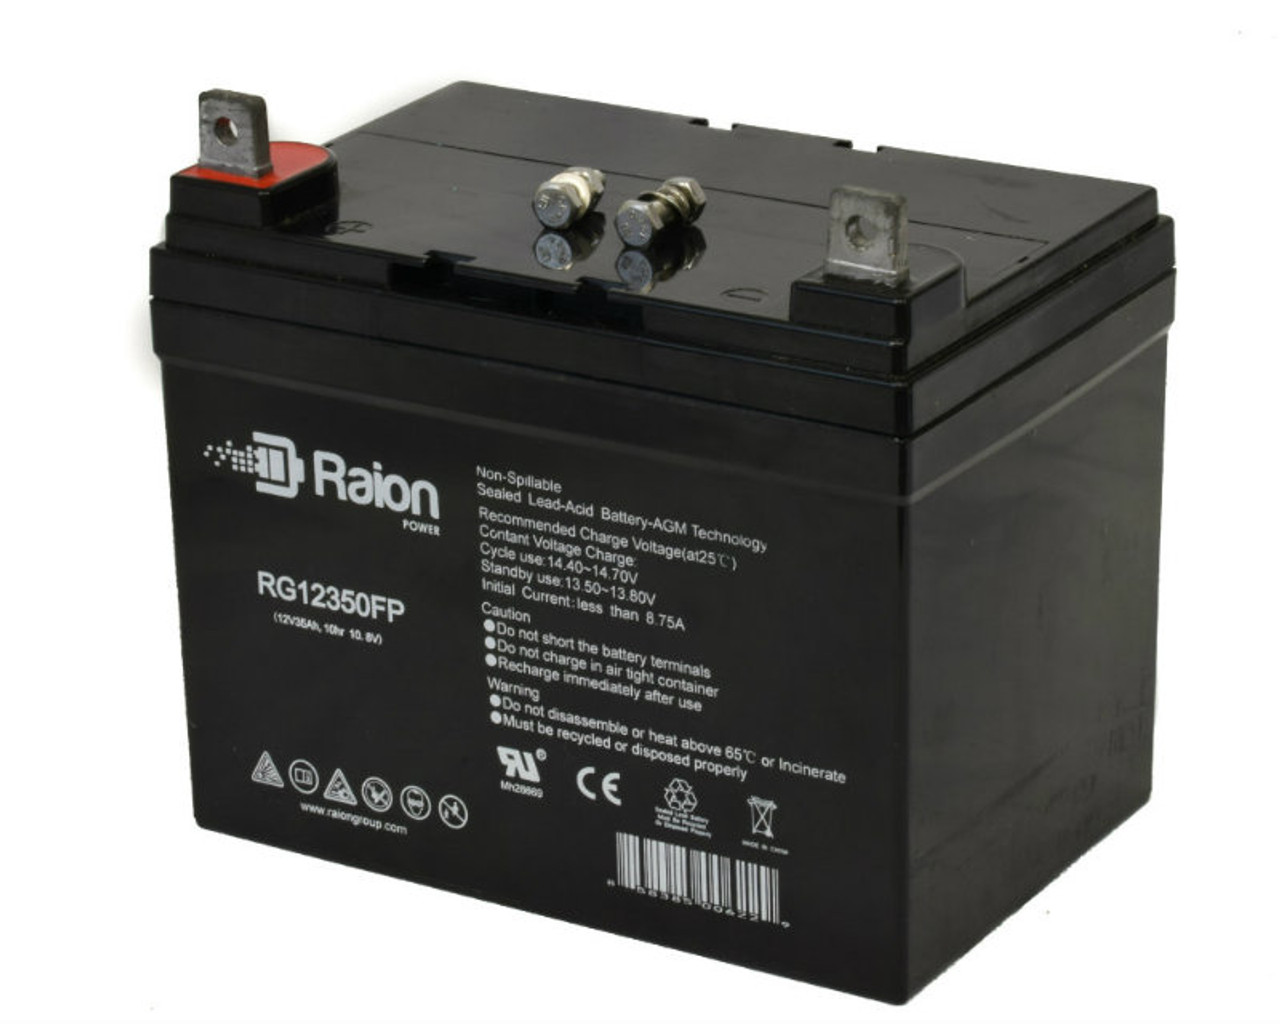 Raion Power Replacement 12V 35Ah RG12350FP Mobility Scooter Battery for Chauffeur Mobility Viva MWD* PowerChair